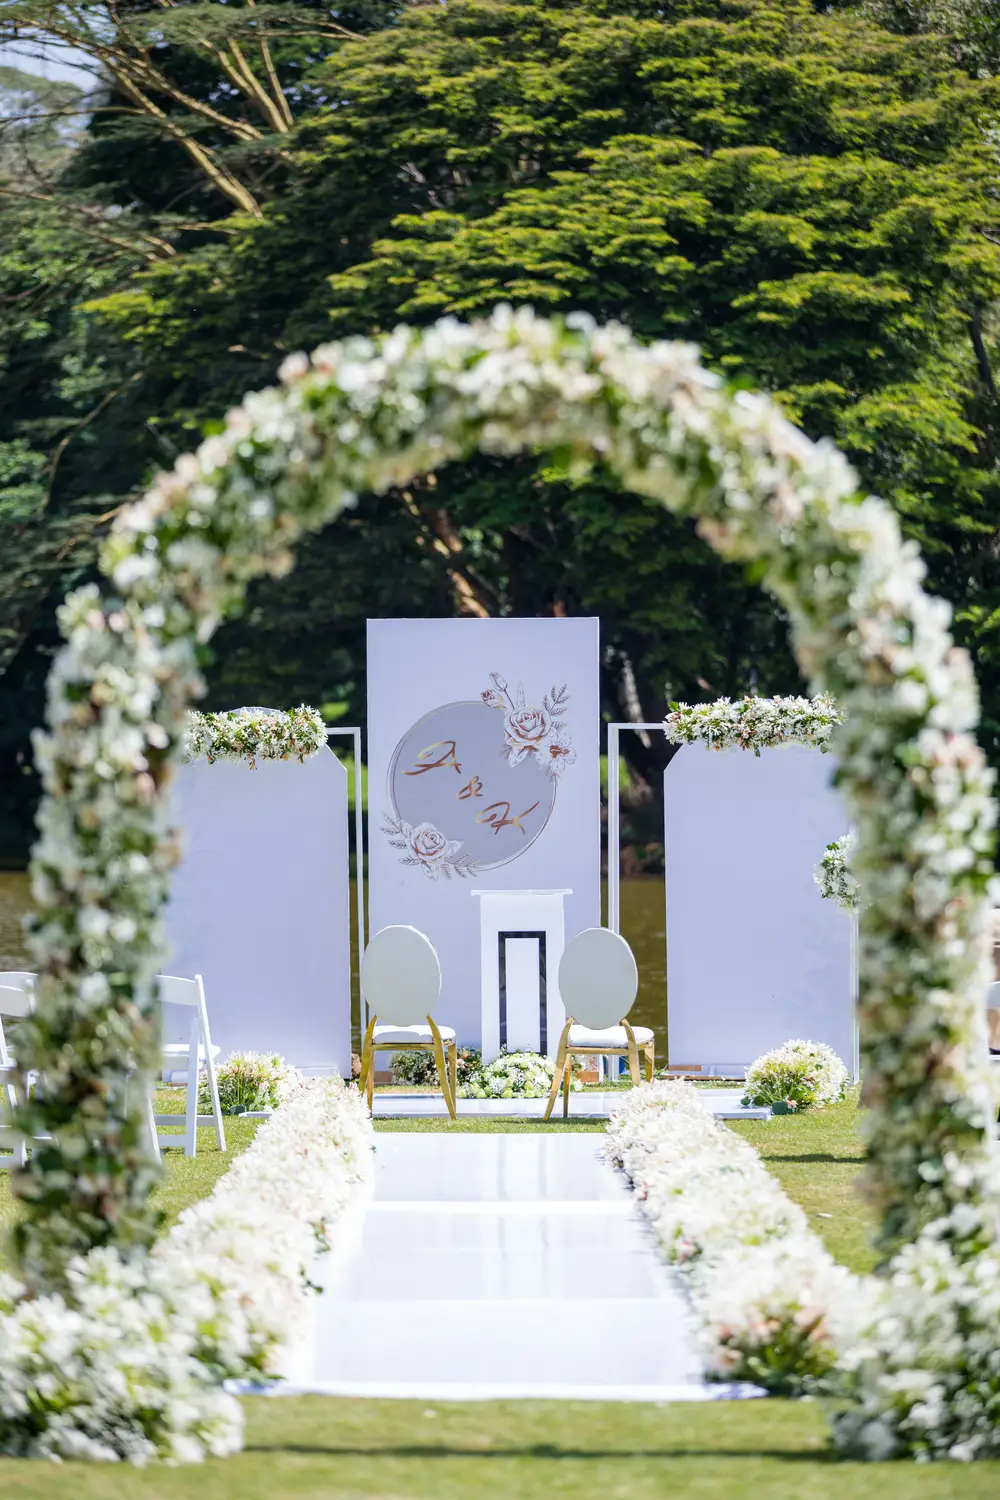 Wedding arc Decorated wit h Lily flowers